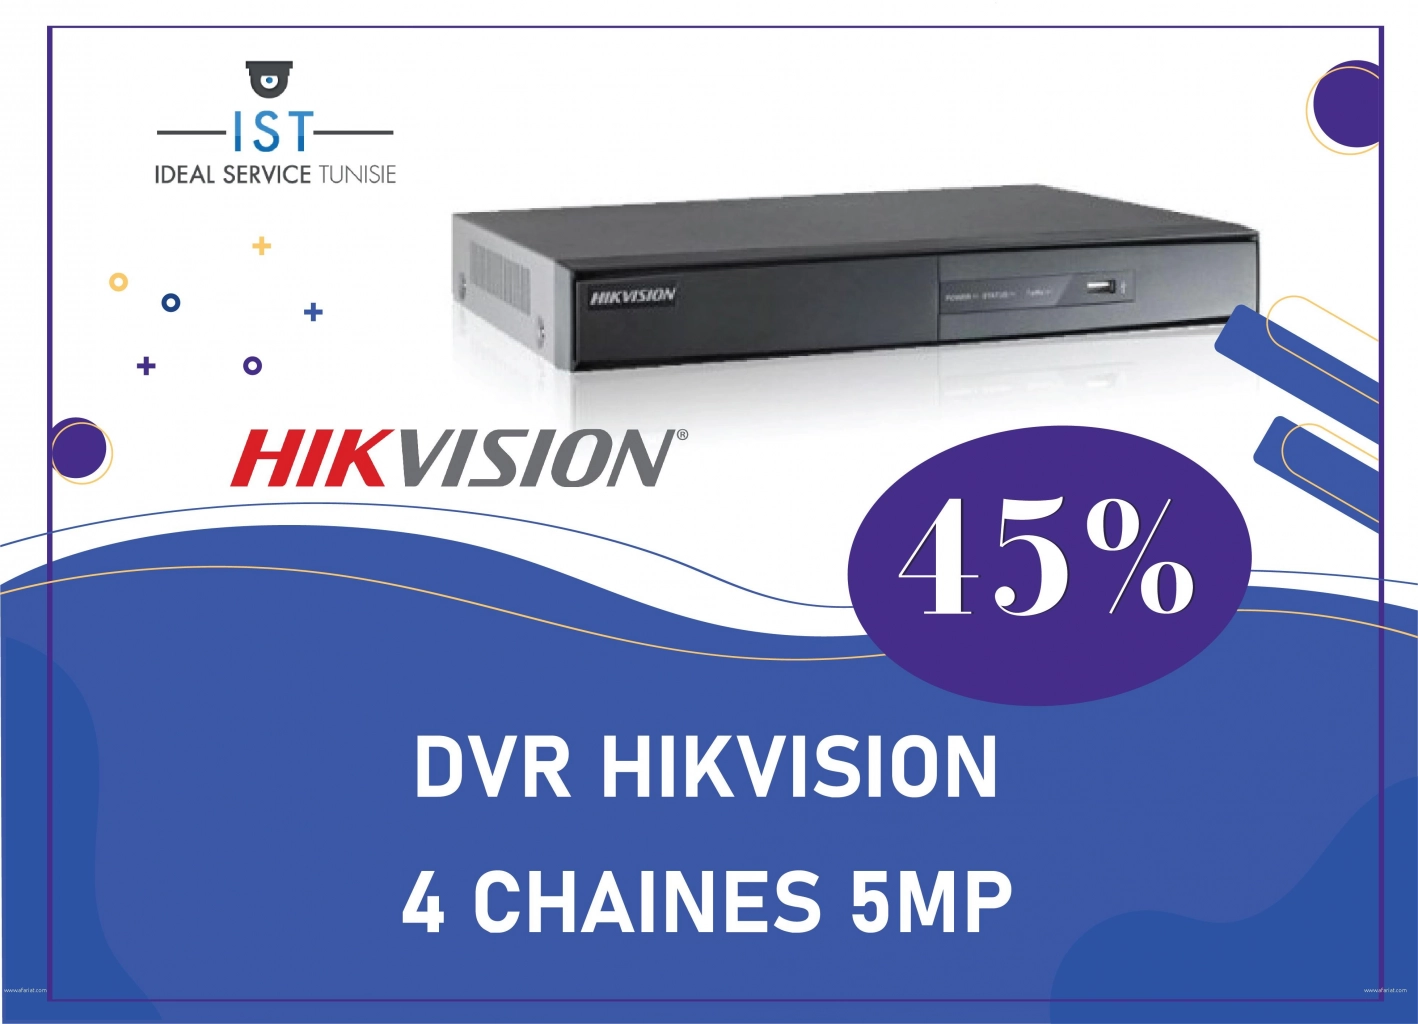 IST: DVR HIKVISION 4 CHAINES 5 MP